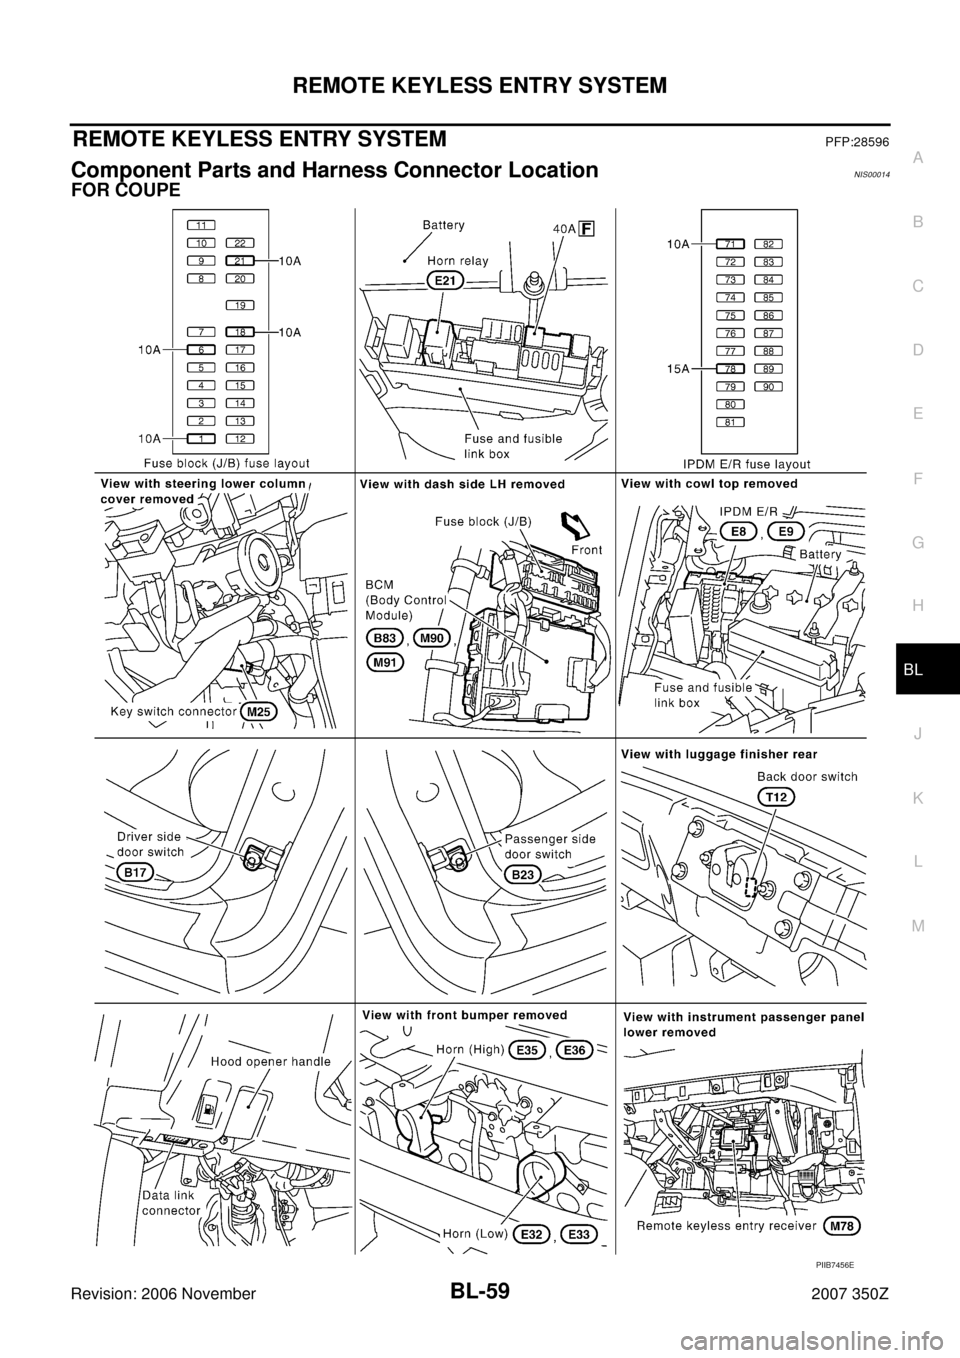 NISSAN 350Z 2007 Z33 Body, Lock And Security System Repair Manual REMOTE KEYLESS ENTRY SYSTEM
BL-59
C
D
E
F
G
H
J
K
L
MA
B
BL
Revision: 2006 November2007 350Z
REMOTE KEYLESS ENTRY SYSTEMPFP:28596
Component Parts and Harness Connector LocationNIS00014
FOR COUPE
PIIB7